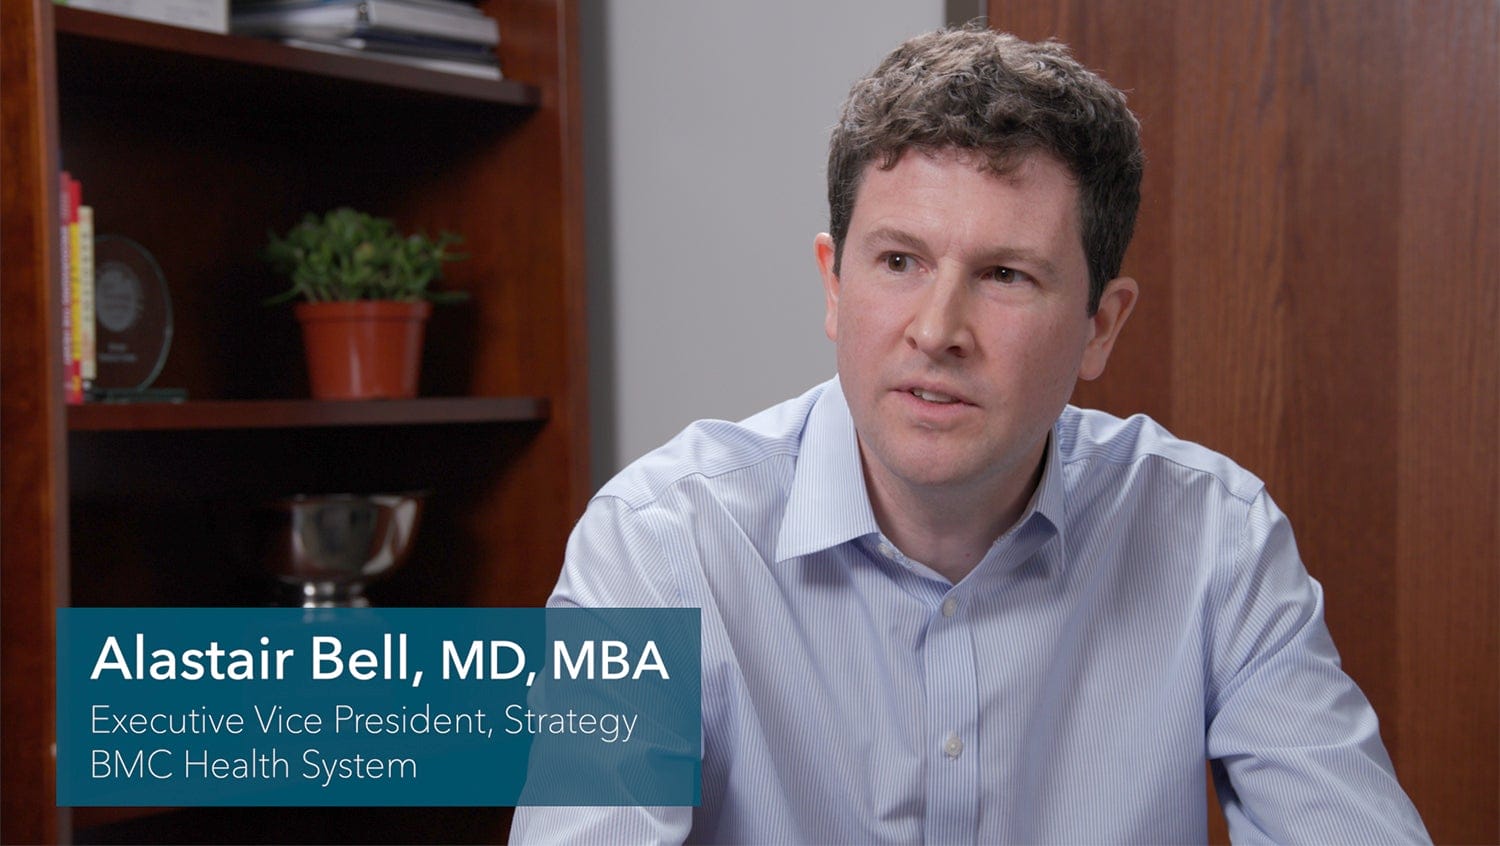 Alastair Bell, MD, MBA discusses coronavirus patient surge planning with Kate Walsh, CEO of Boston Medical Center Health System.